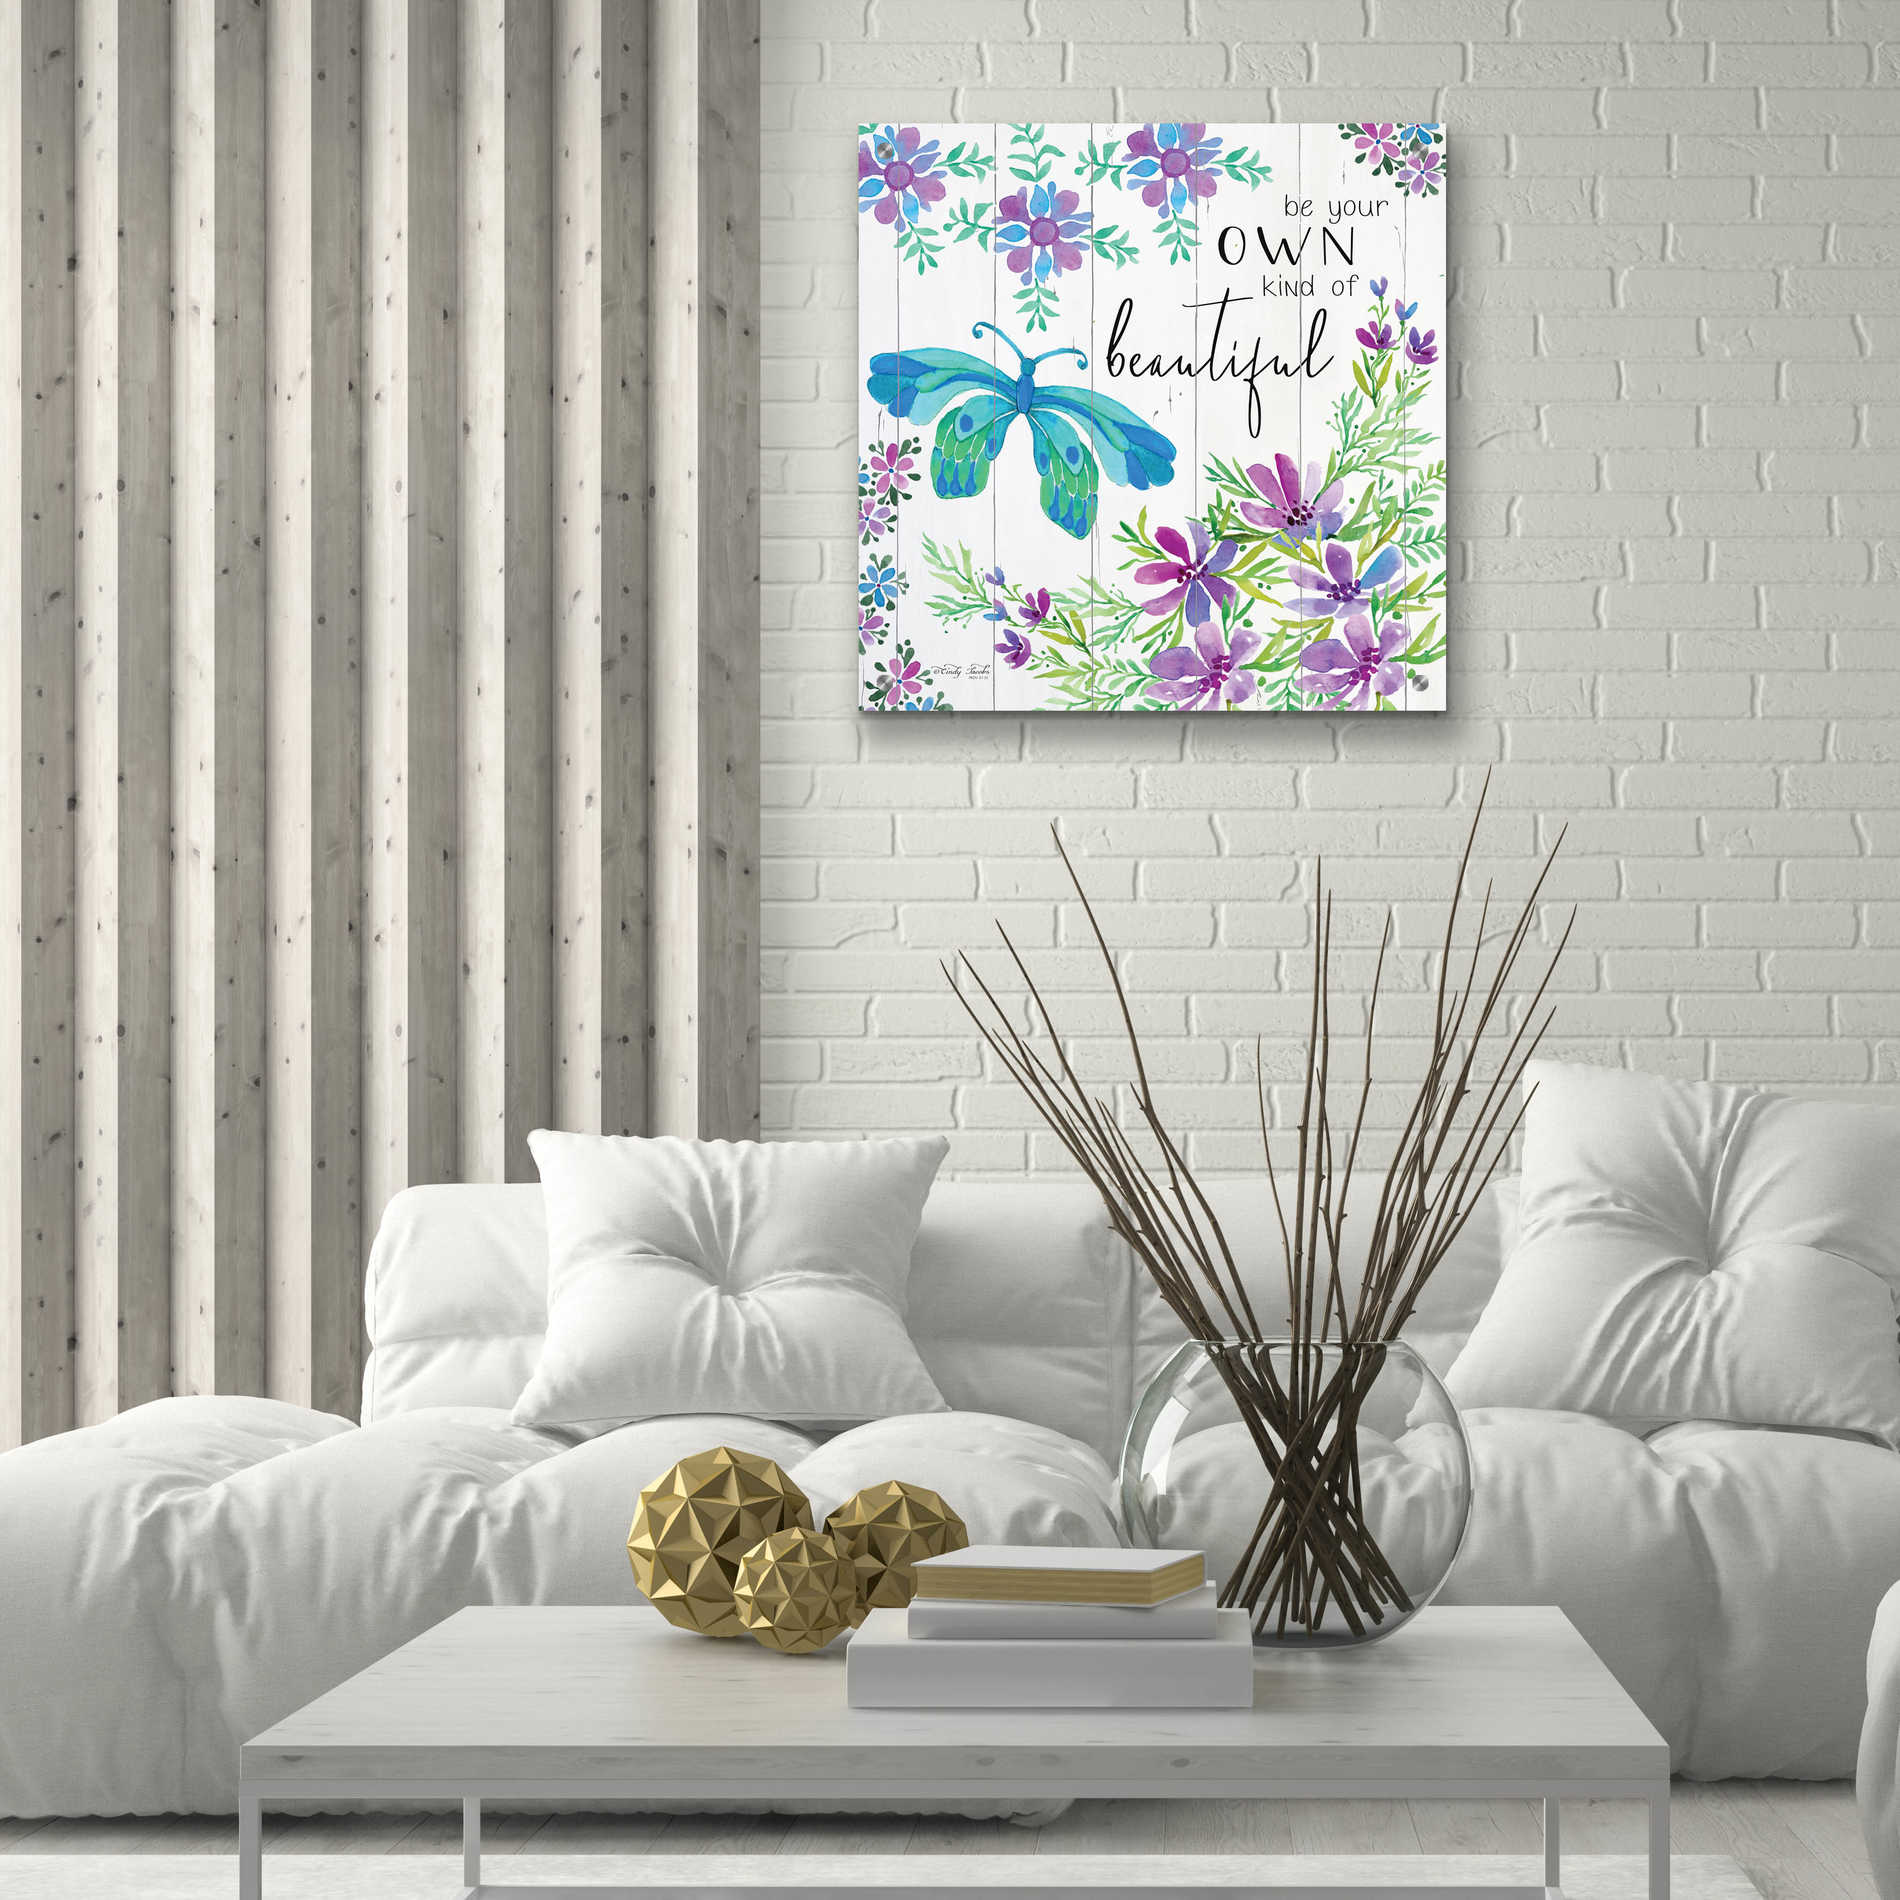 Epic Art 'Be Your Own Kind of Beautiful' by Cindy Jacobs, Acrylic Glass Wall Art,24x24